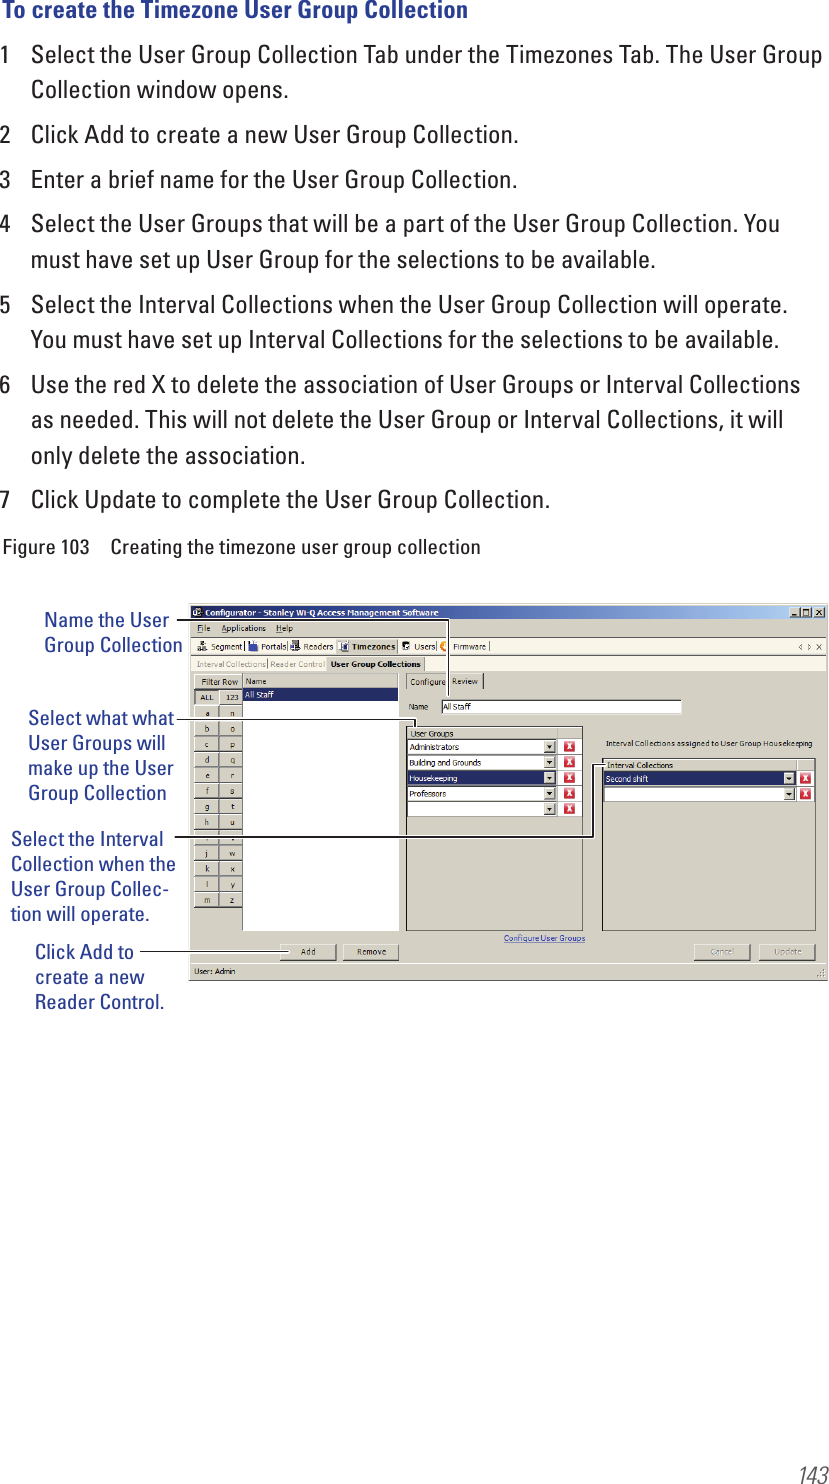 143To create the Timezone User Group Collection1  Select the User Group Collection Tab under the Timezones Tab. The User Group Collection window opens.2  Click Add to create a new User Group Collection.3  Enter a brief name for the User Group Collection.4  Select the User Groups that will be a part of the User Group Collection. You must have set up User Group for the selections to be available.5  Select the Interval Collections when the User Group Collection will operate. You must have set up Interval Collections for the selections to be available.6  Use the red X to delete the association of User Groups or Interval Collections as needed. This will not delete the User Group or Interval Collections, it will only delete the association.7  Click Update to complete the User Group Collection.Figure 103  Creating the timezone user group collectionName the User Group CollectionSelect what what User Groups will make up the User Group CollectionSelect the Interval Collection when the User Group Collec-tion will operate.Click Add to create a new Reader Control.